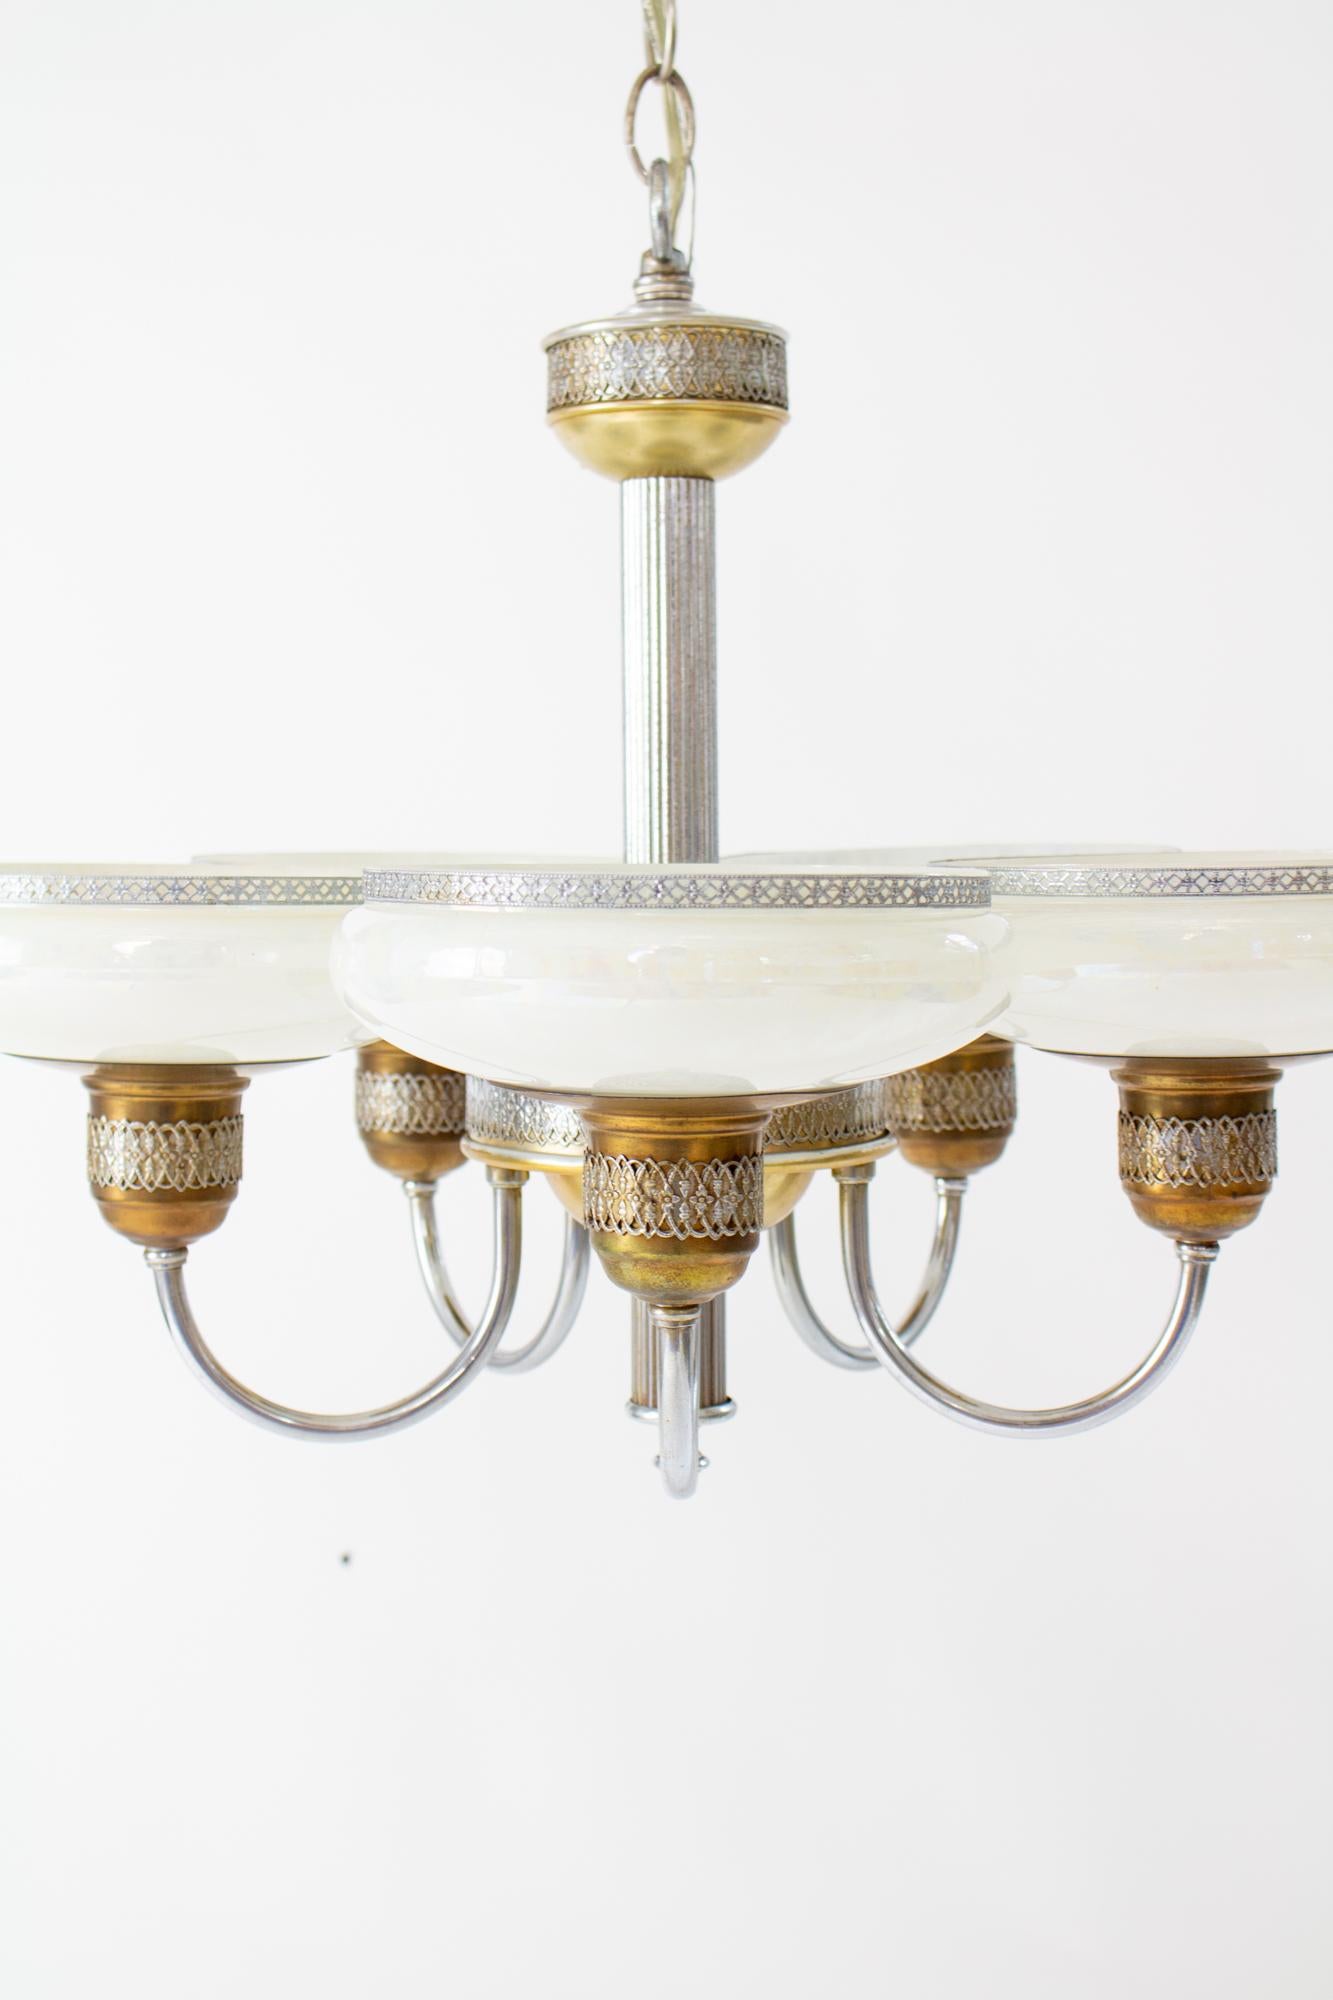 1930’s Art Deco Chandelier with Iridescent Glass In Good Condition For Sale In Canton, MA